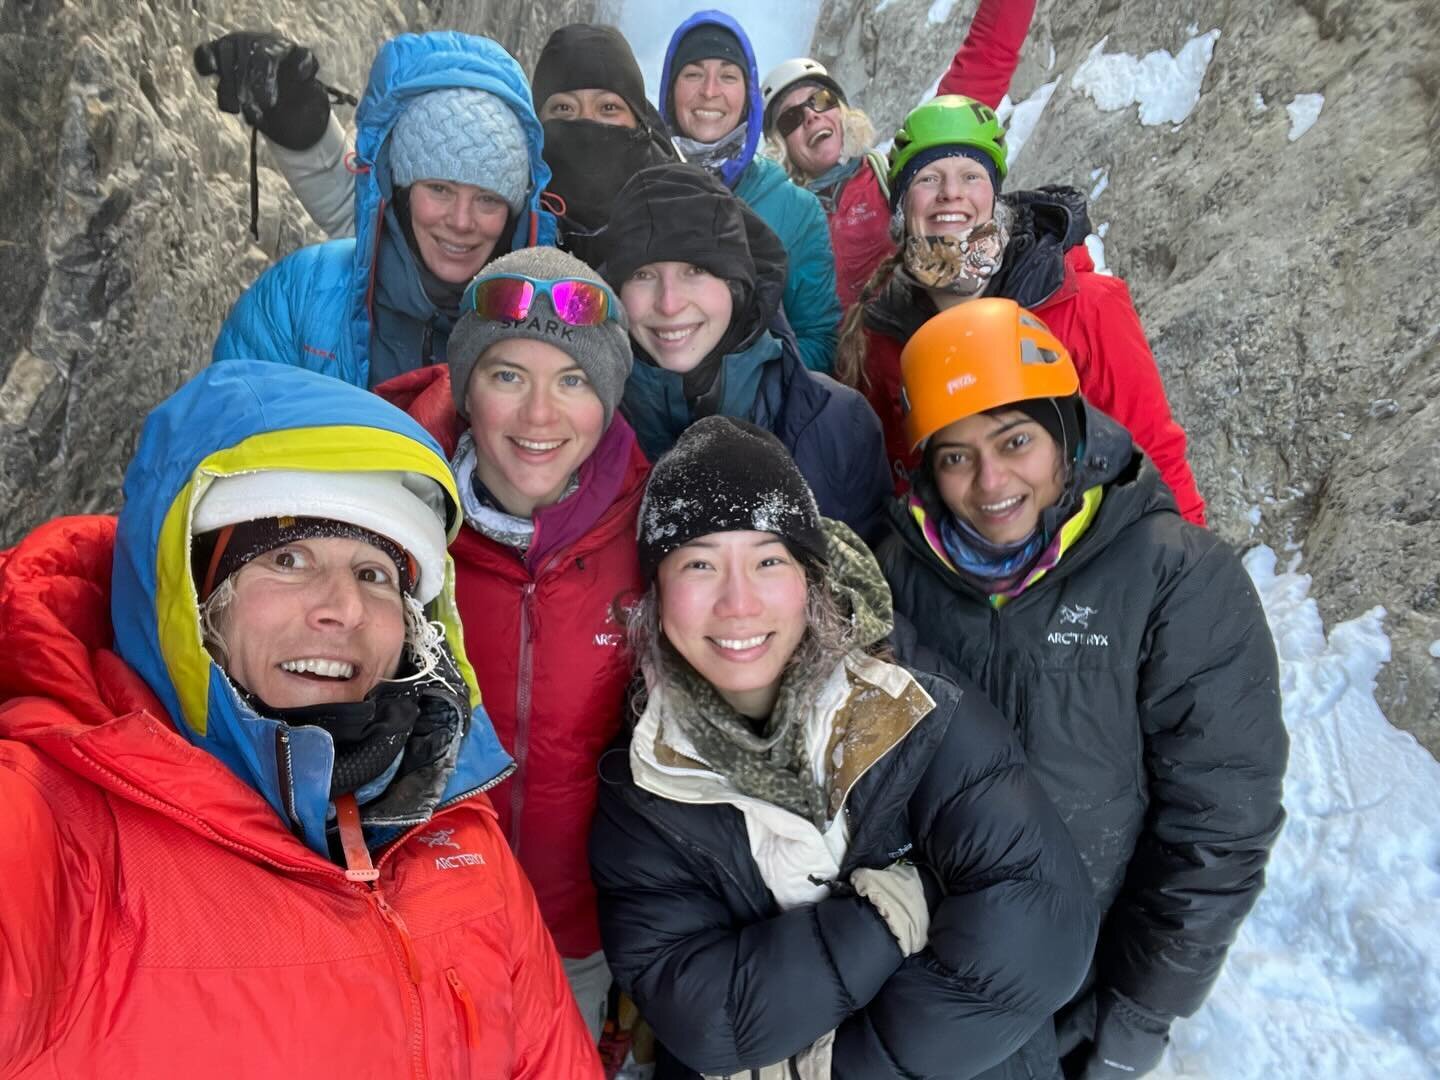 The past few days have been exceptionally cold in the Rockies and I can&rsquo;t say enough how awesome this group of women were. 
.
Thank you @shemovesmountains @huens and @e_xi_r for having me along for some very fun times ( @hannahraepreston ). 
.
